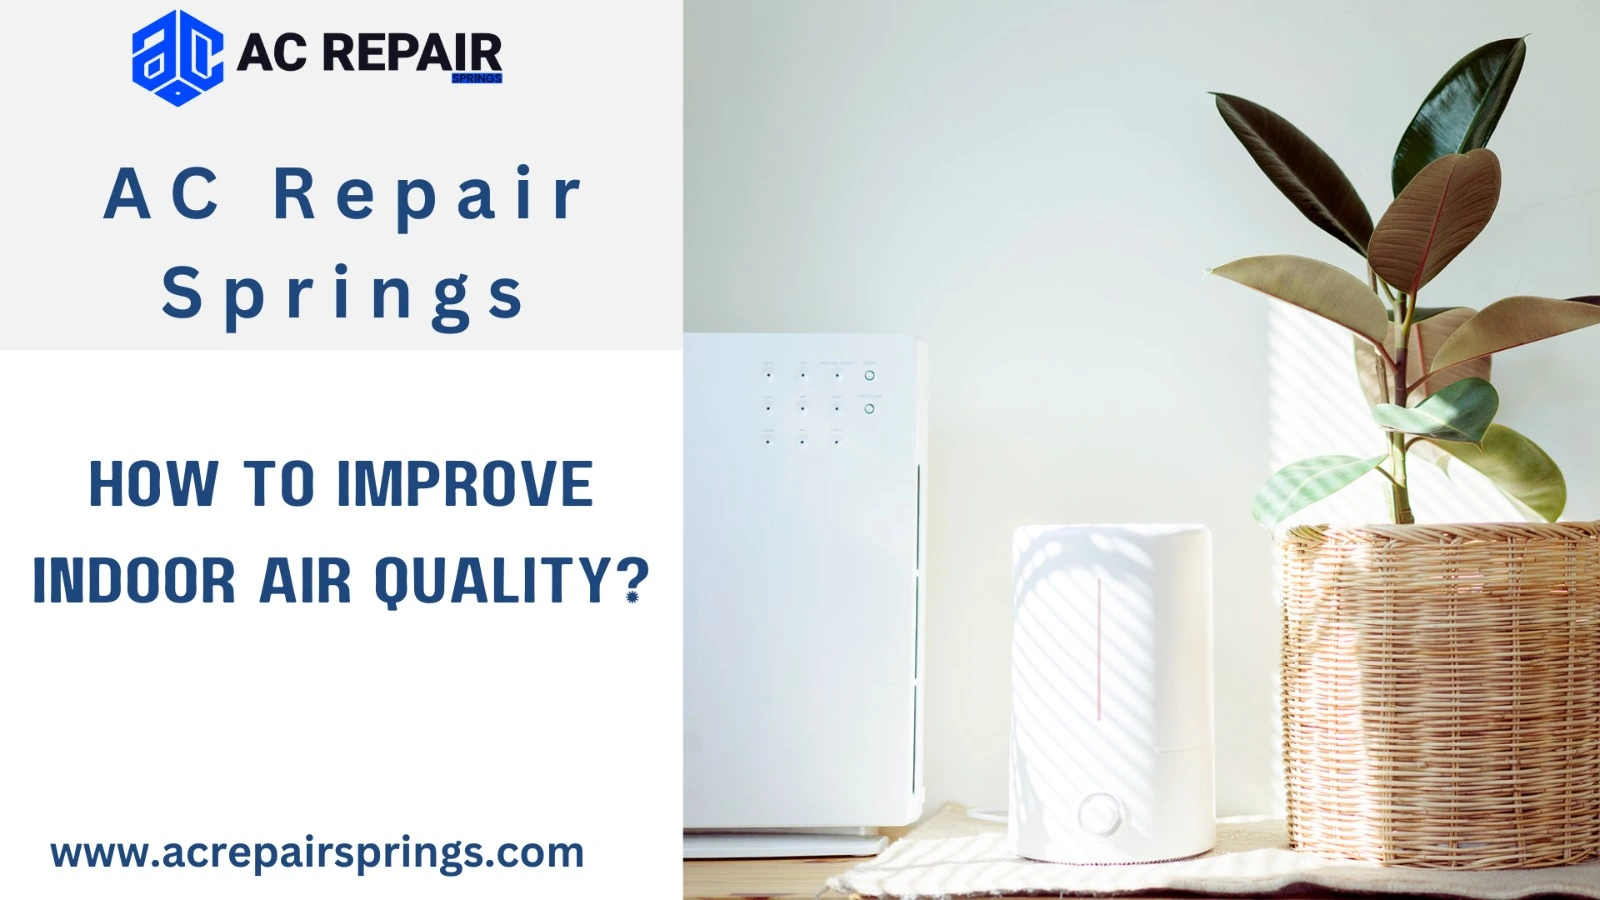 How to Improve Indoor Air Quality?